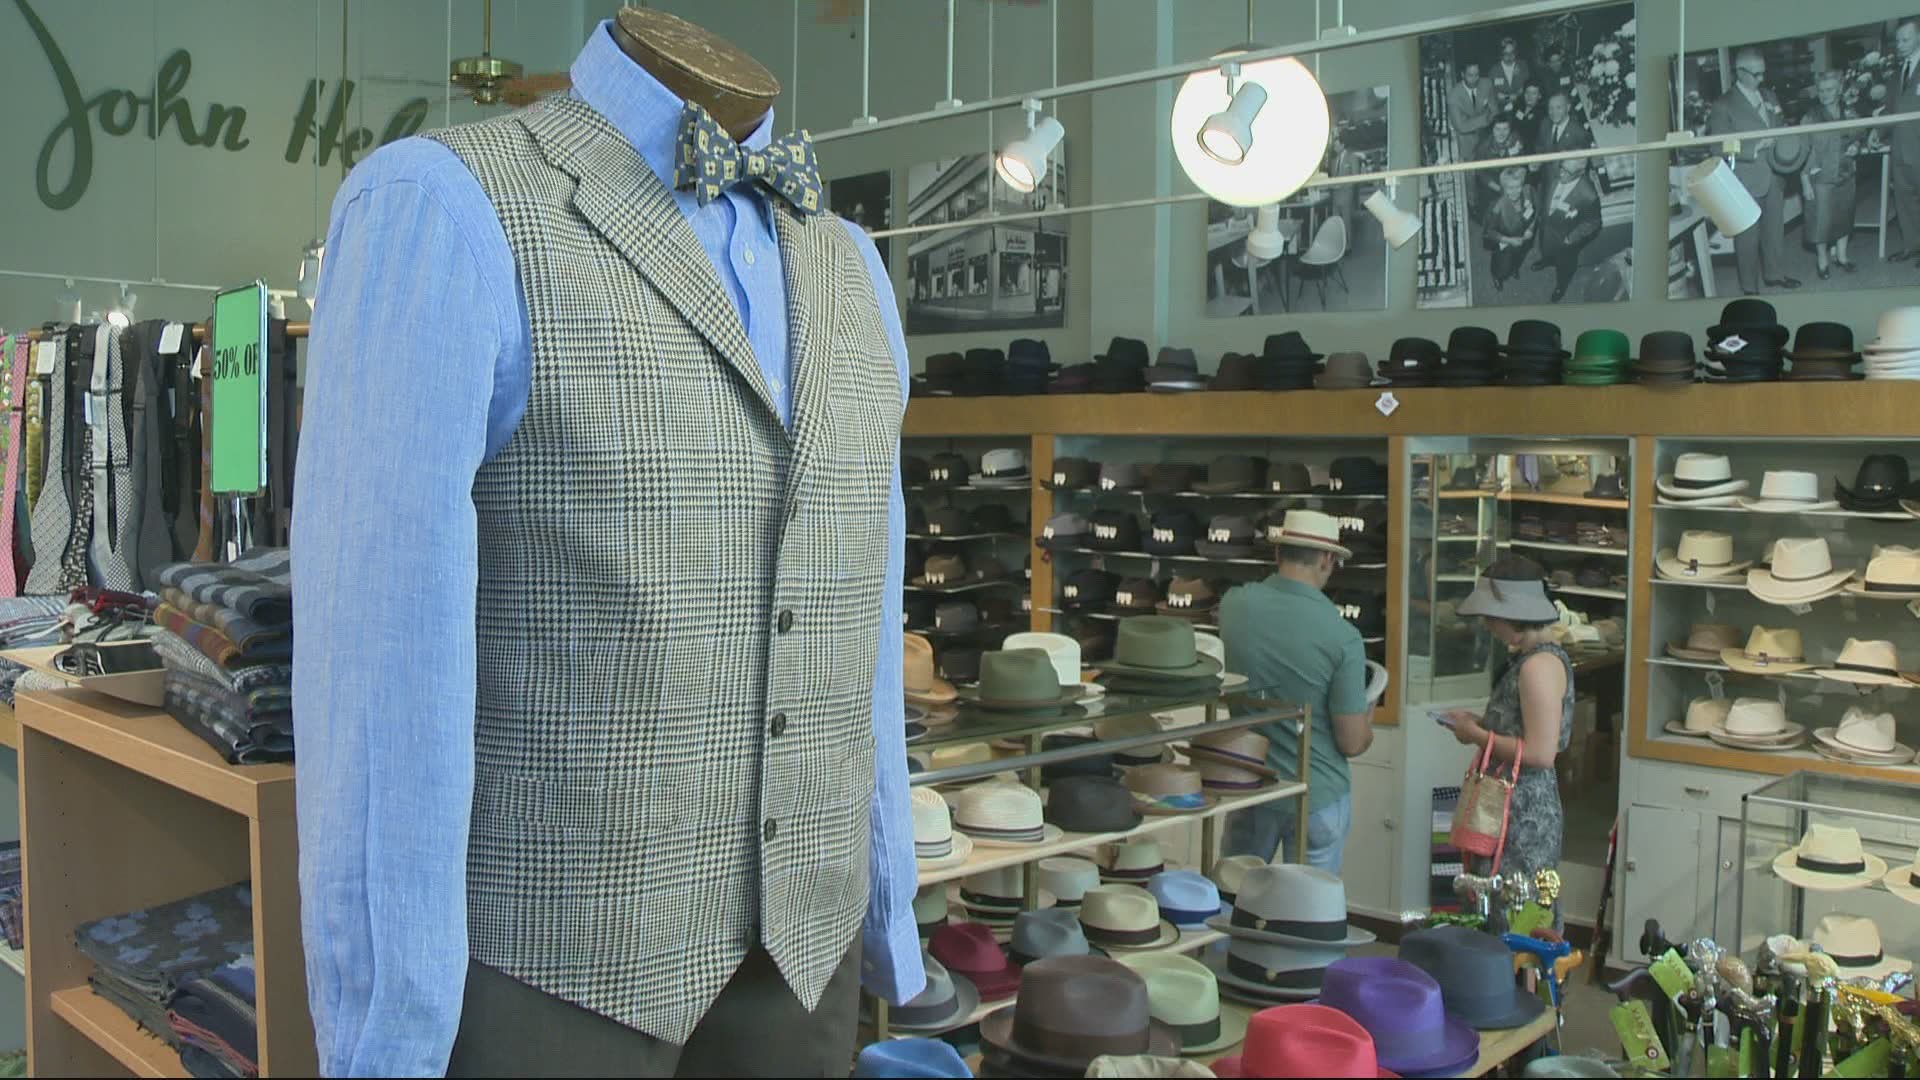 A men's clothing store in downtown Portland is celebrating 100 years in business. Katherine Cook stopped by John Helmer Haberdasher.